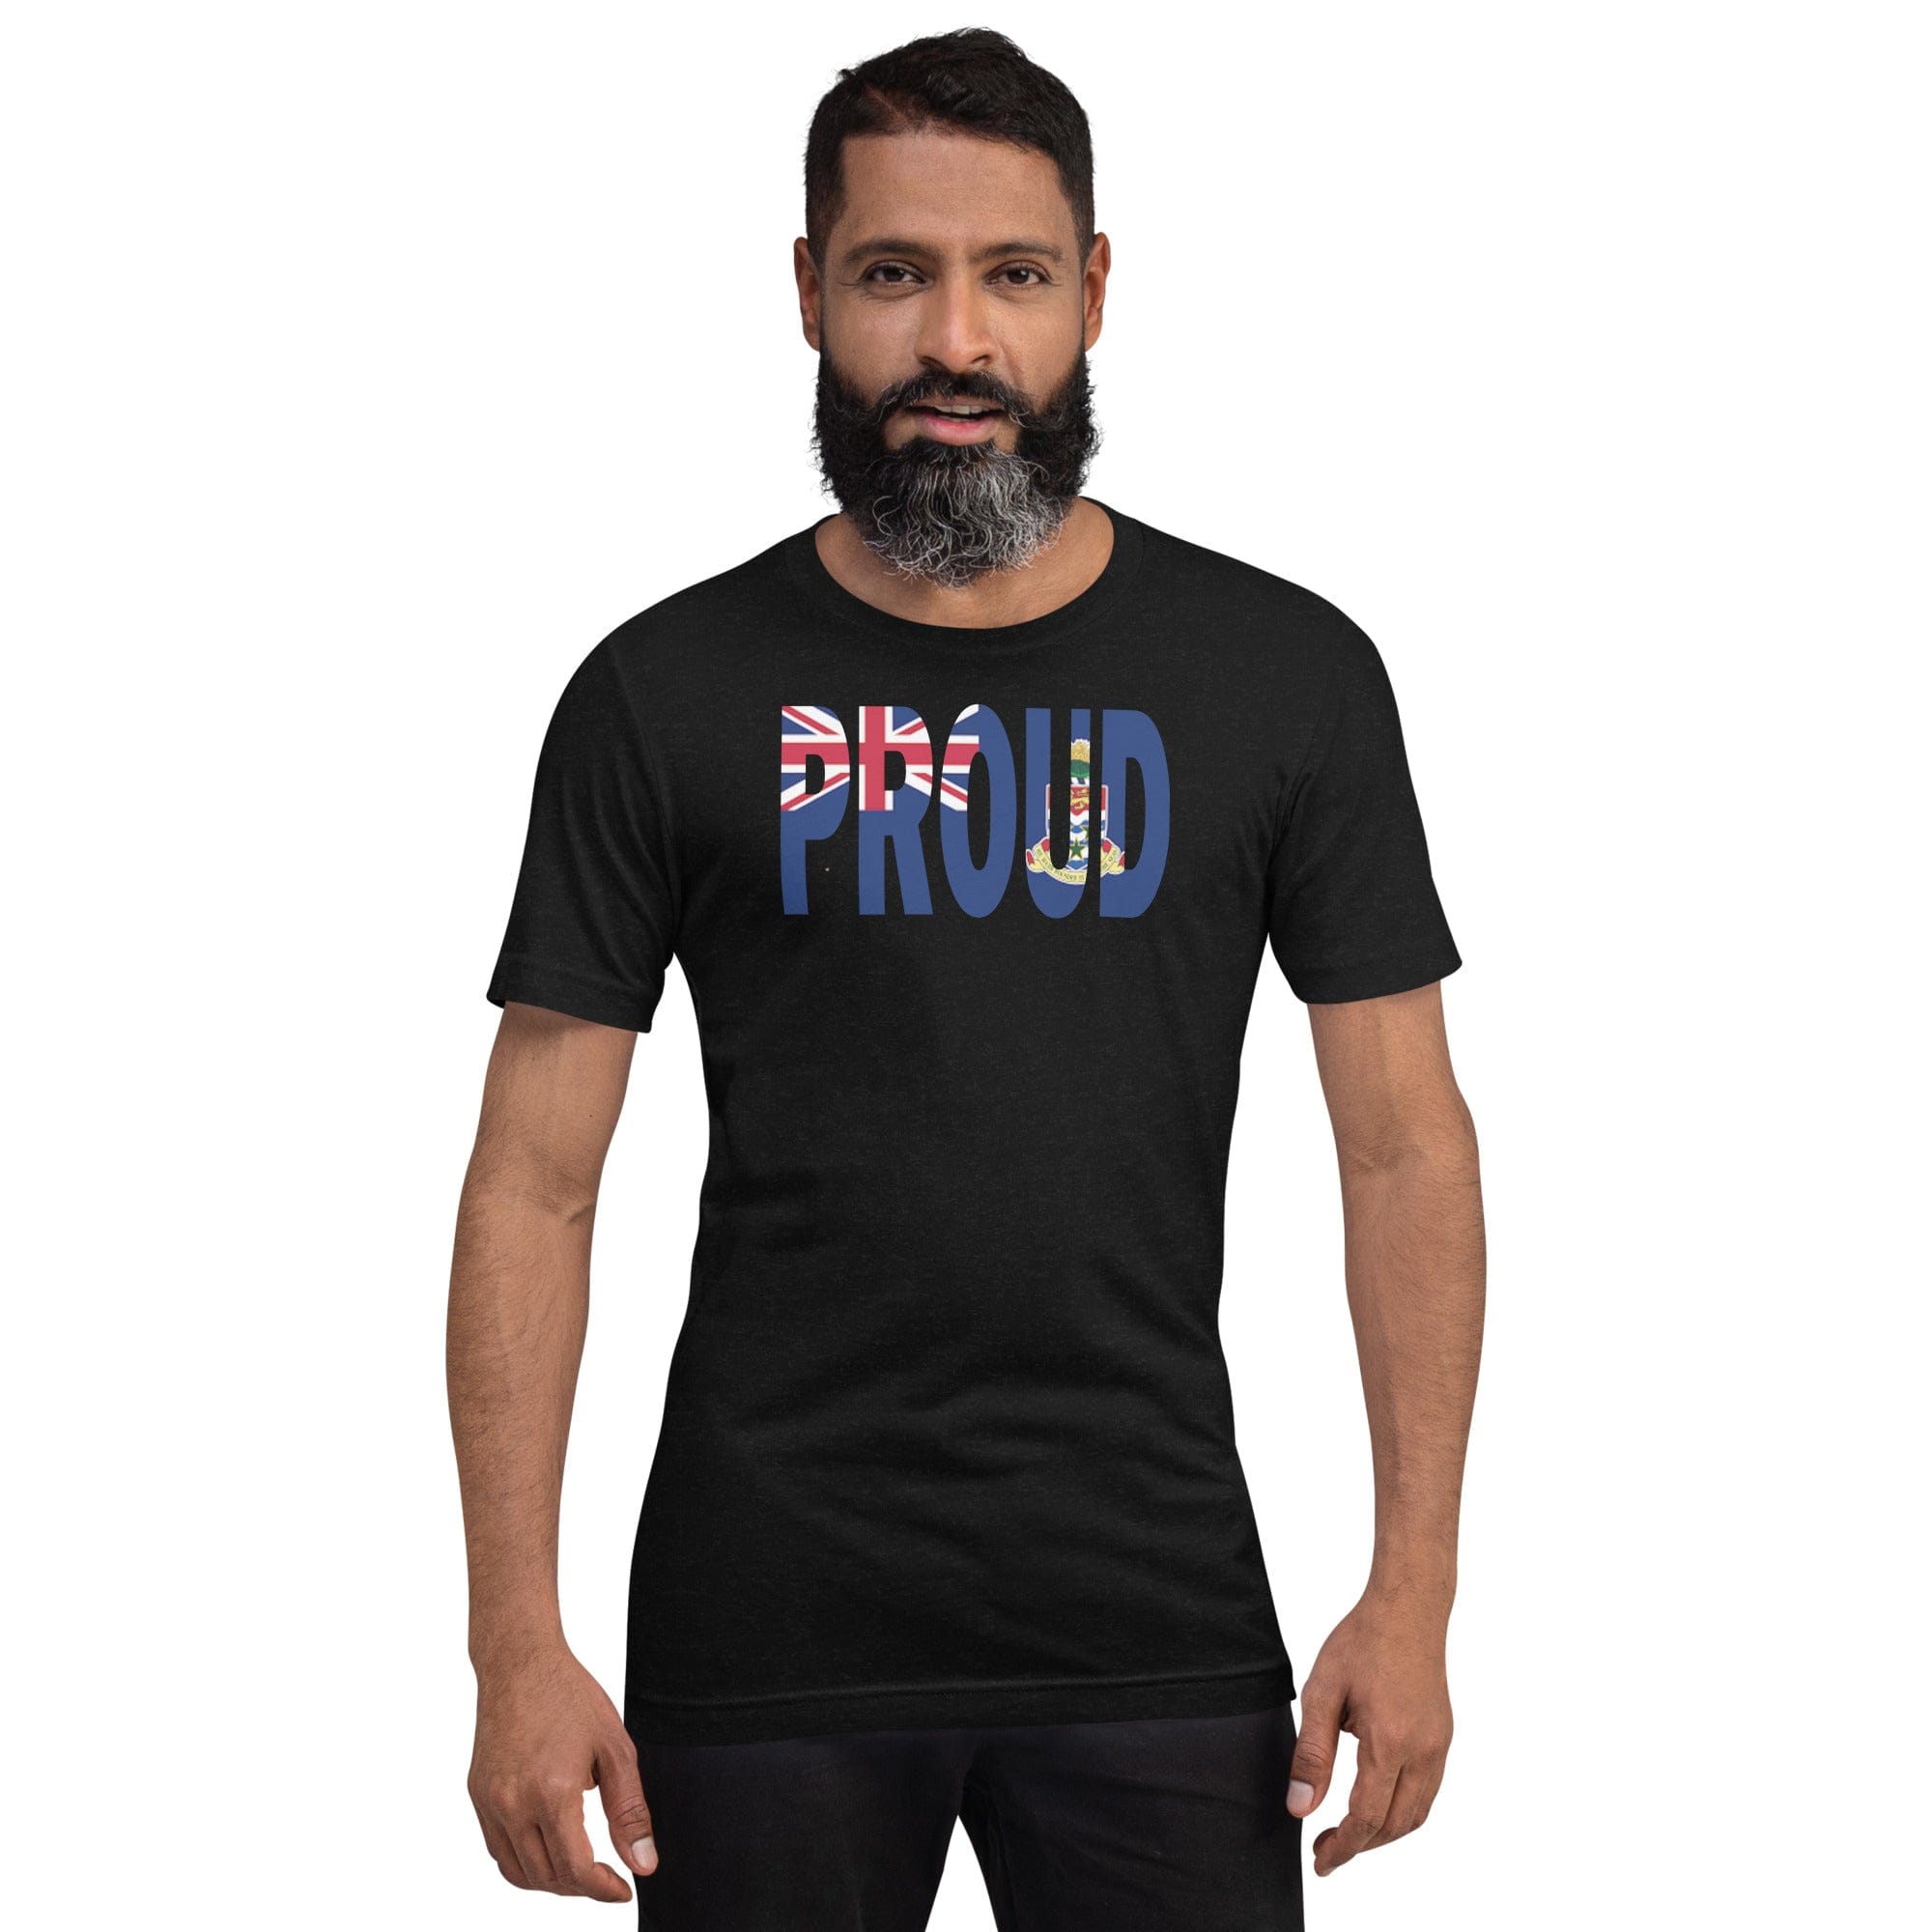 Cayman Islands Flag designed to spell Proud on a black color t-shirt worn by a black man.